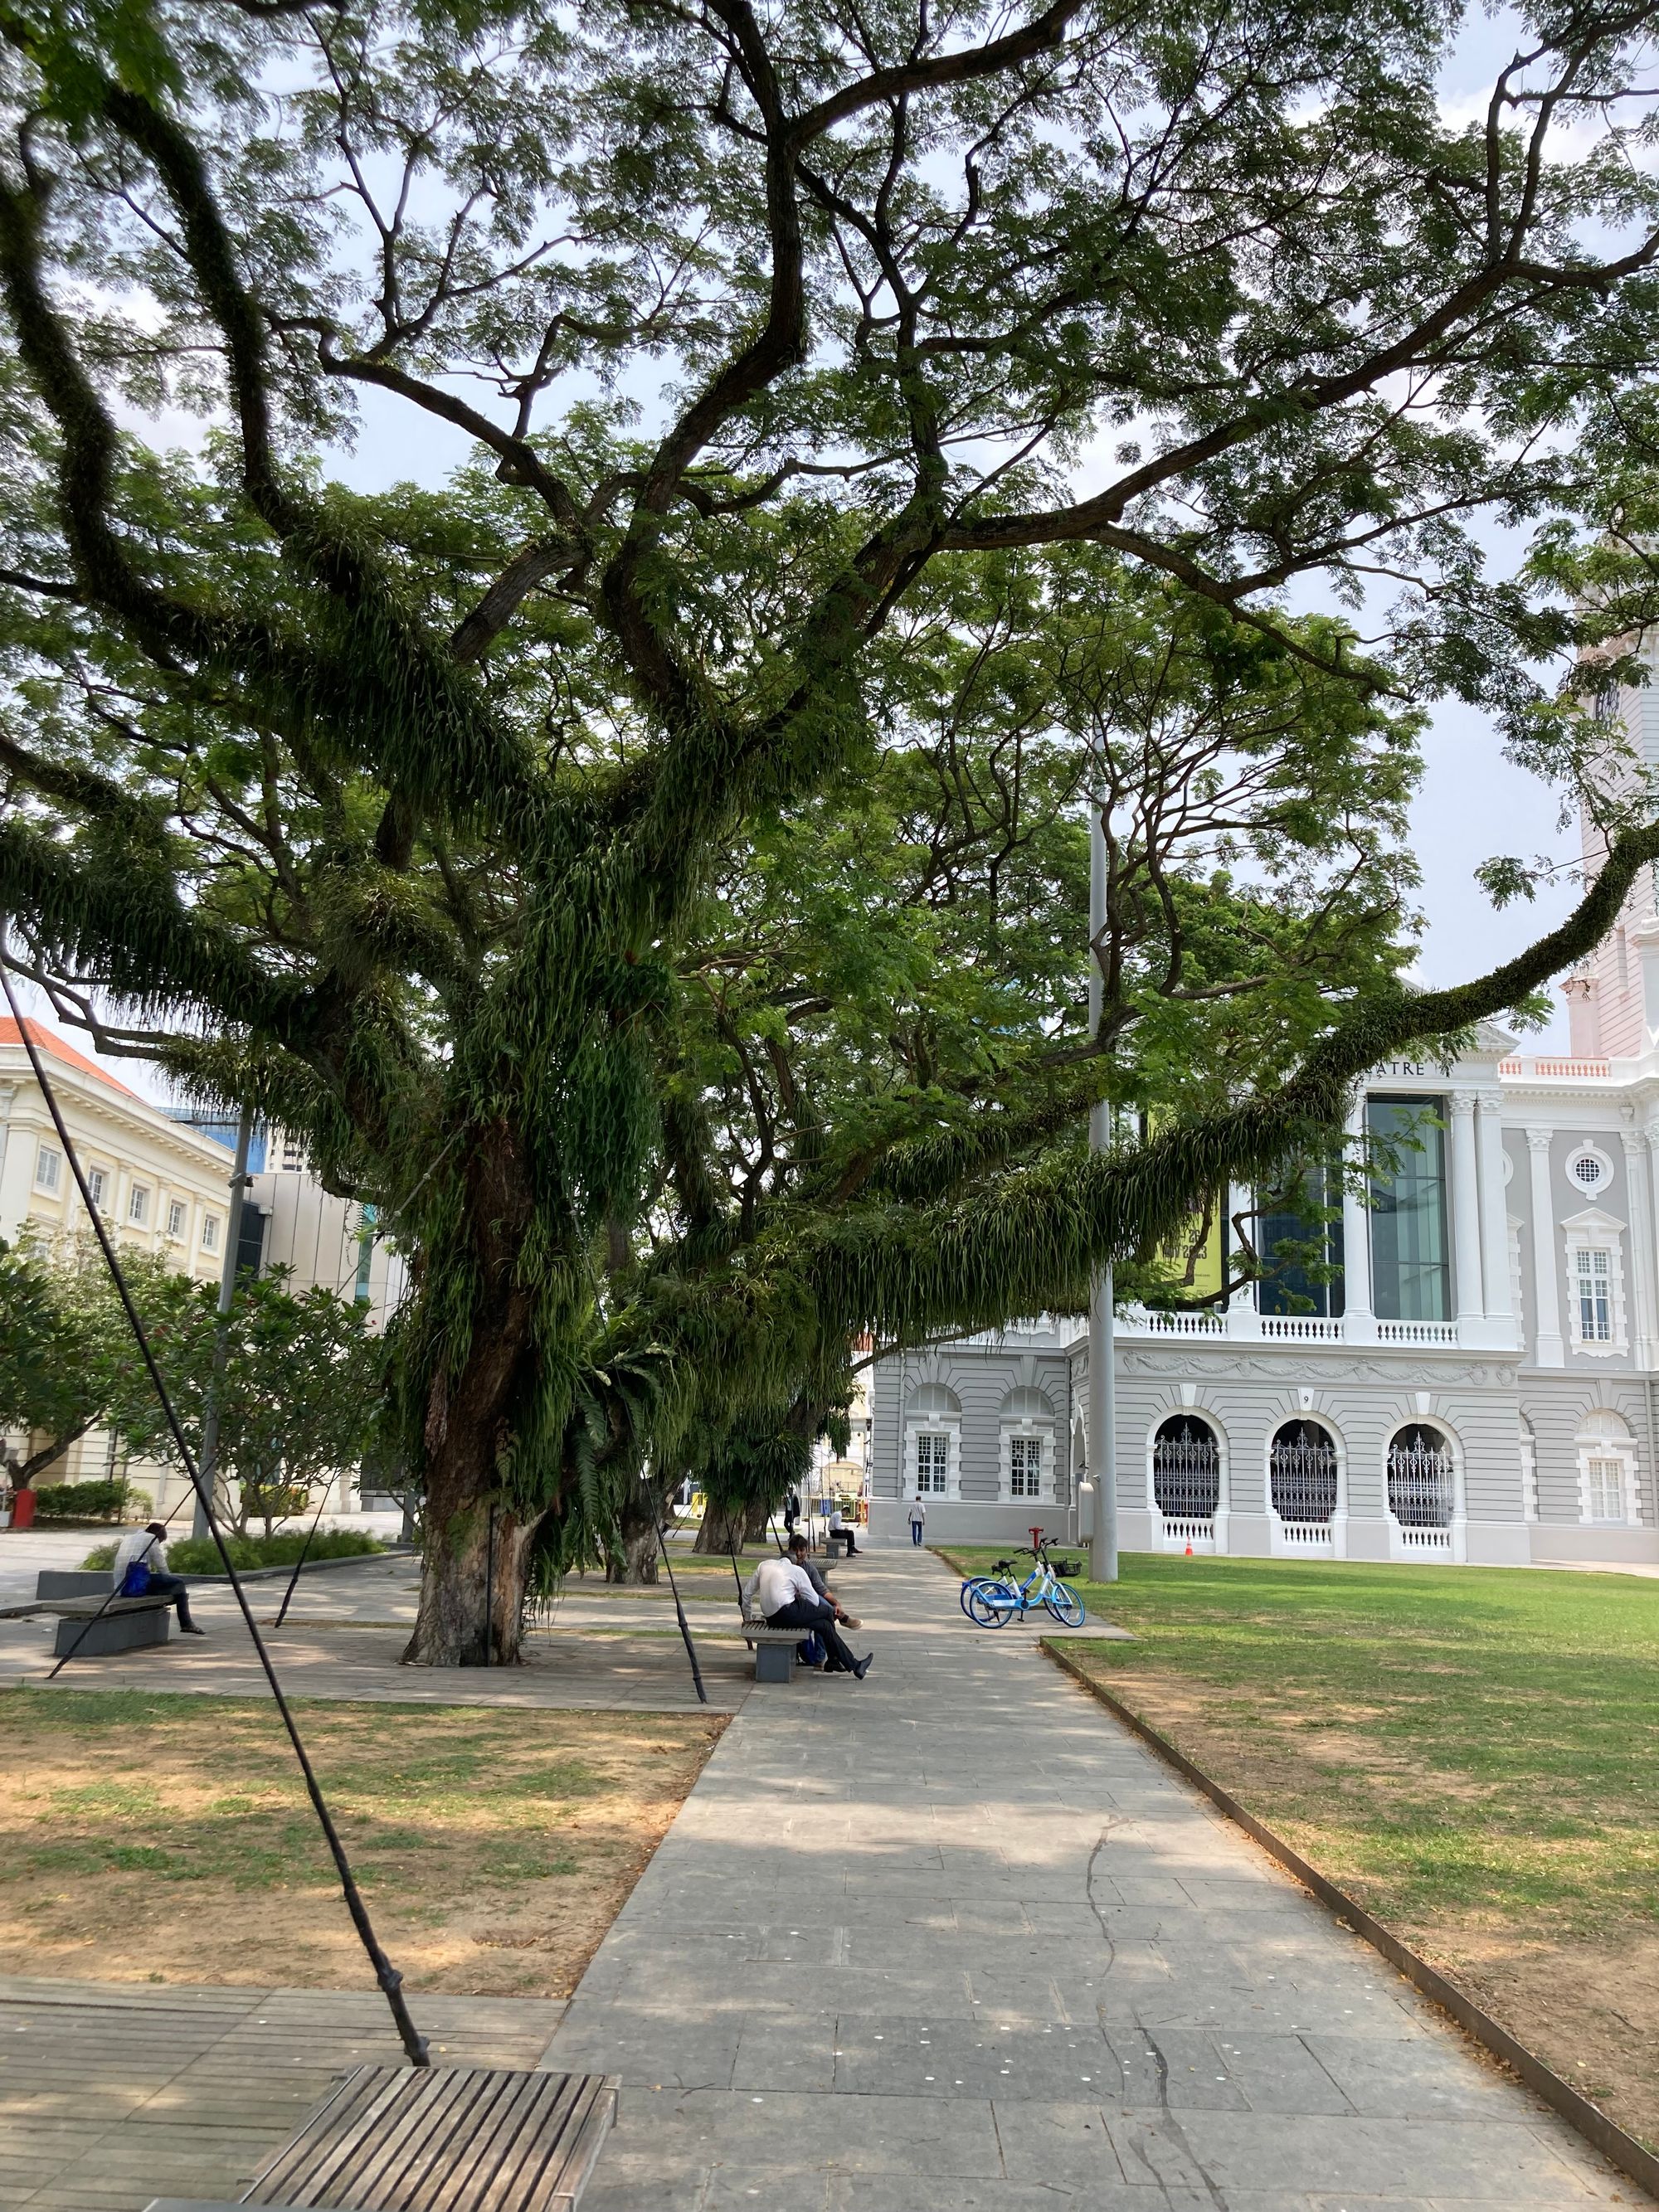 People chilling on benches under some old and large rain trees. At the back is a 19th century colonial-era building.